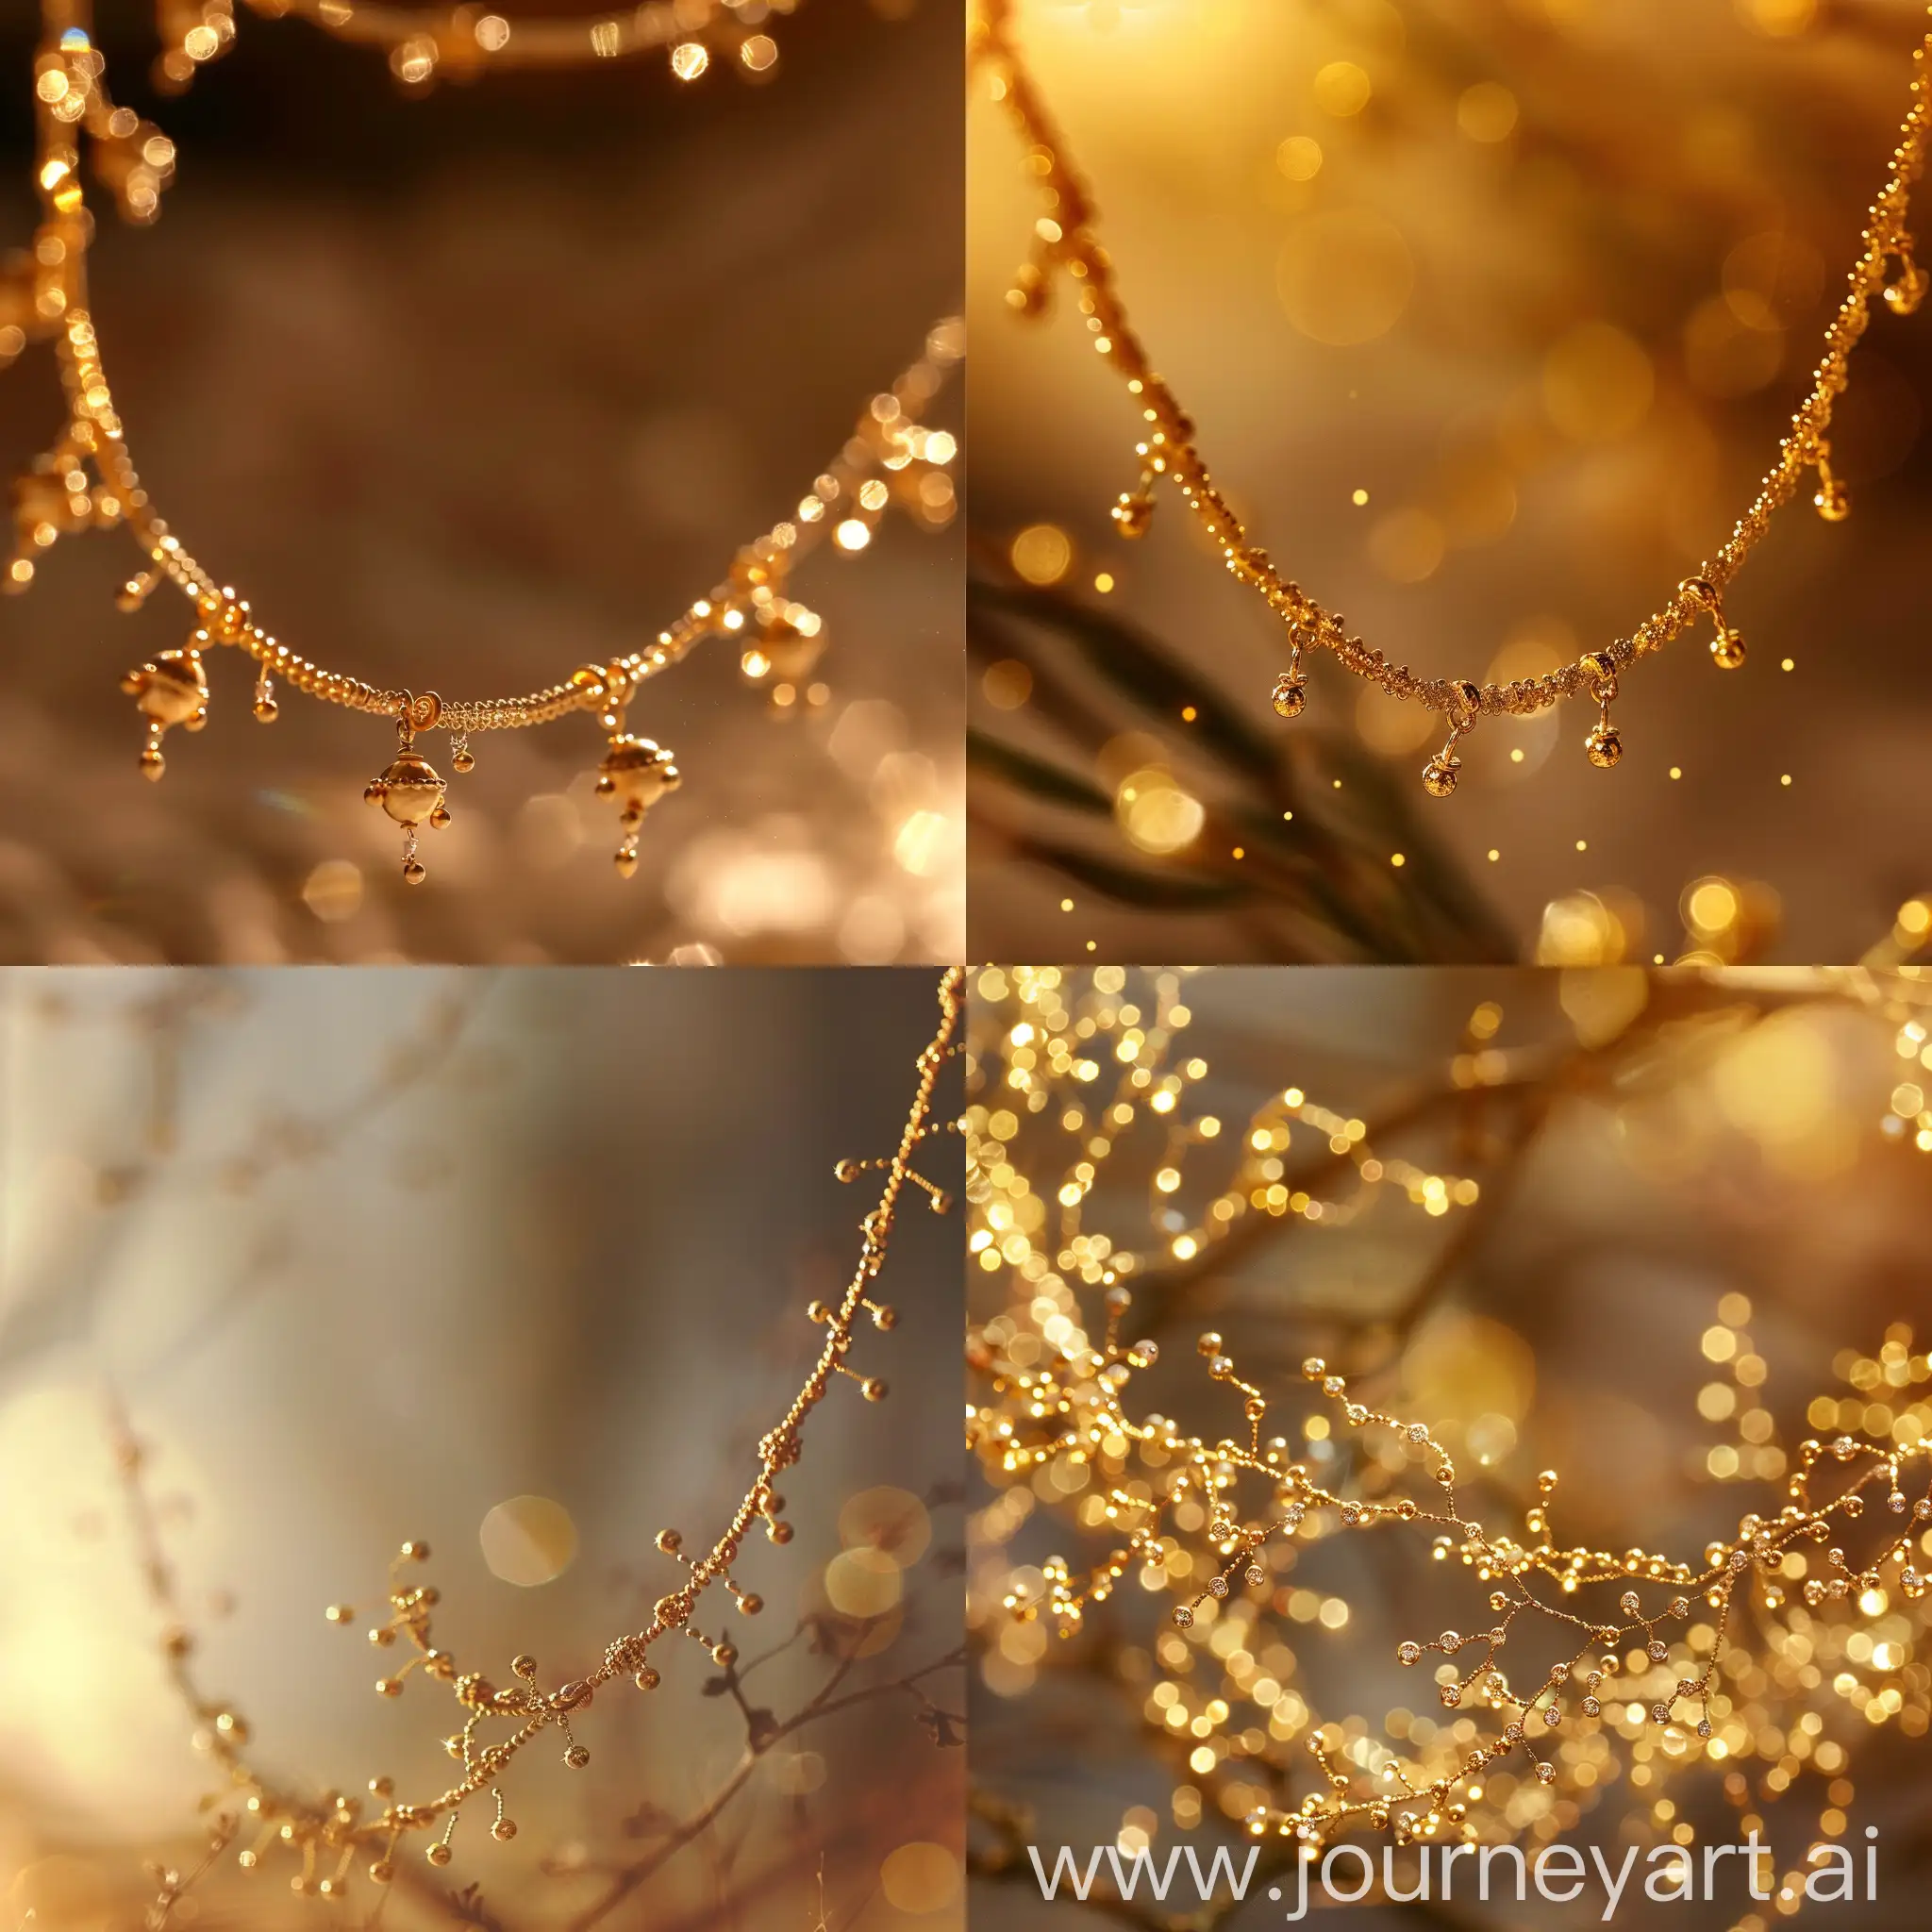 A gracefully elegant fine gold necklace, each delicate link shimmering in the softest glow of sunlight. The intricate design showcases minimal but intricate details, where tiny gold beads sparkle like stars in the night sky. This exquisitely crafted piece is captured in a high-resolution photograph, showing every minute detail with crystal clarity. The image exudes a sense of luxury and sophistication, making the viewer feel as though they can almost reach out and touch the golden masterpiece.